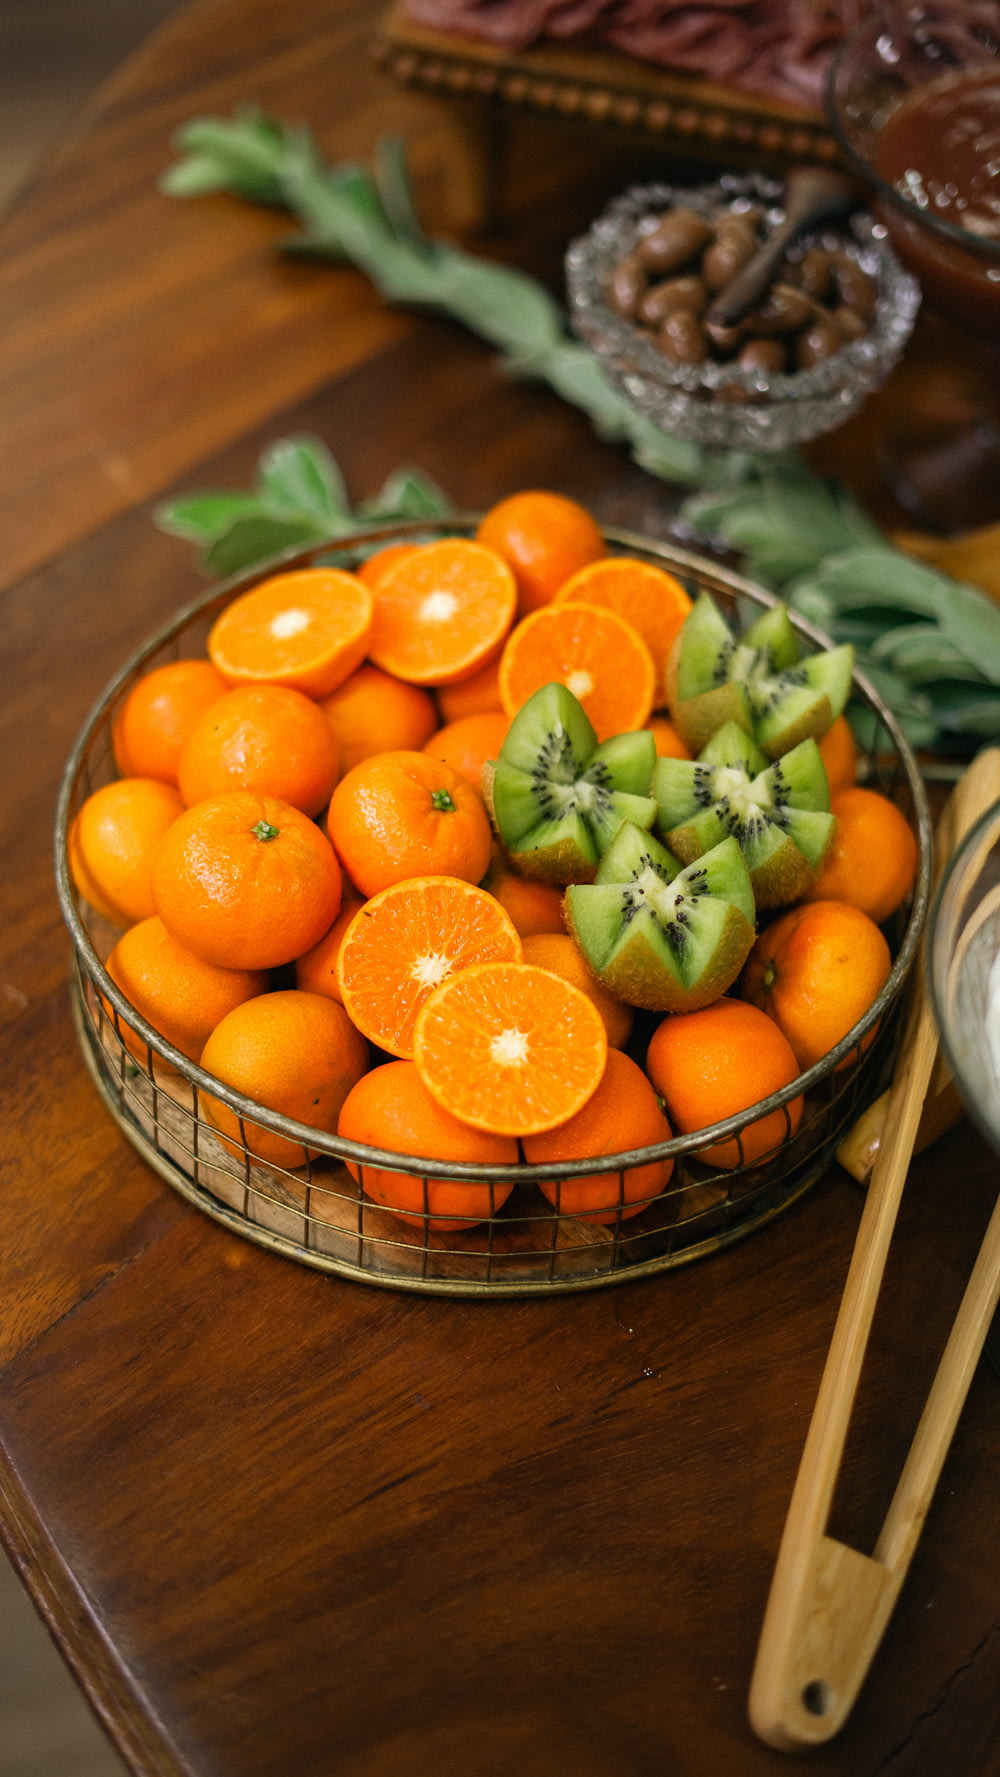 a basket of oranges and kiwis on a table